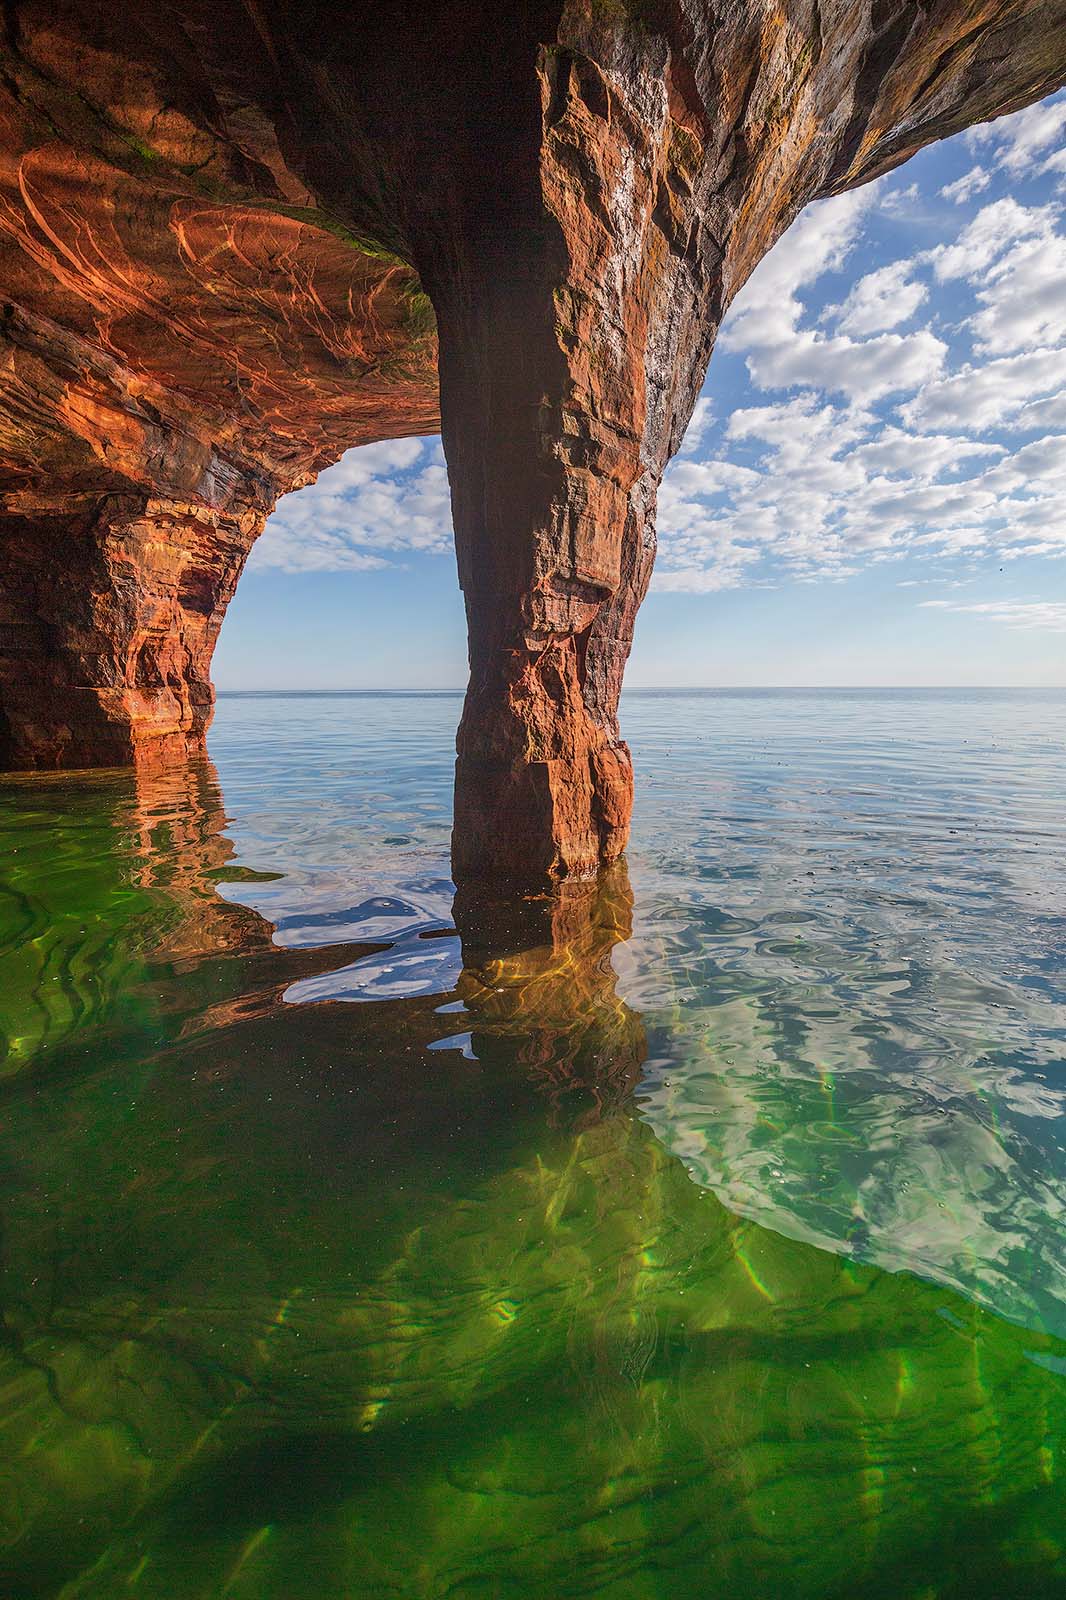 sandstone sea cave with underwater structure in clear green water on devil's island in the apostle islands